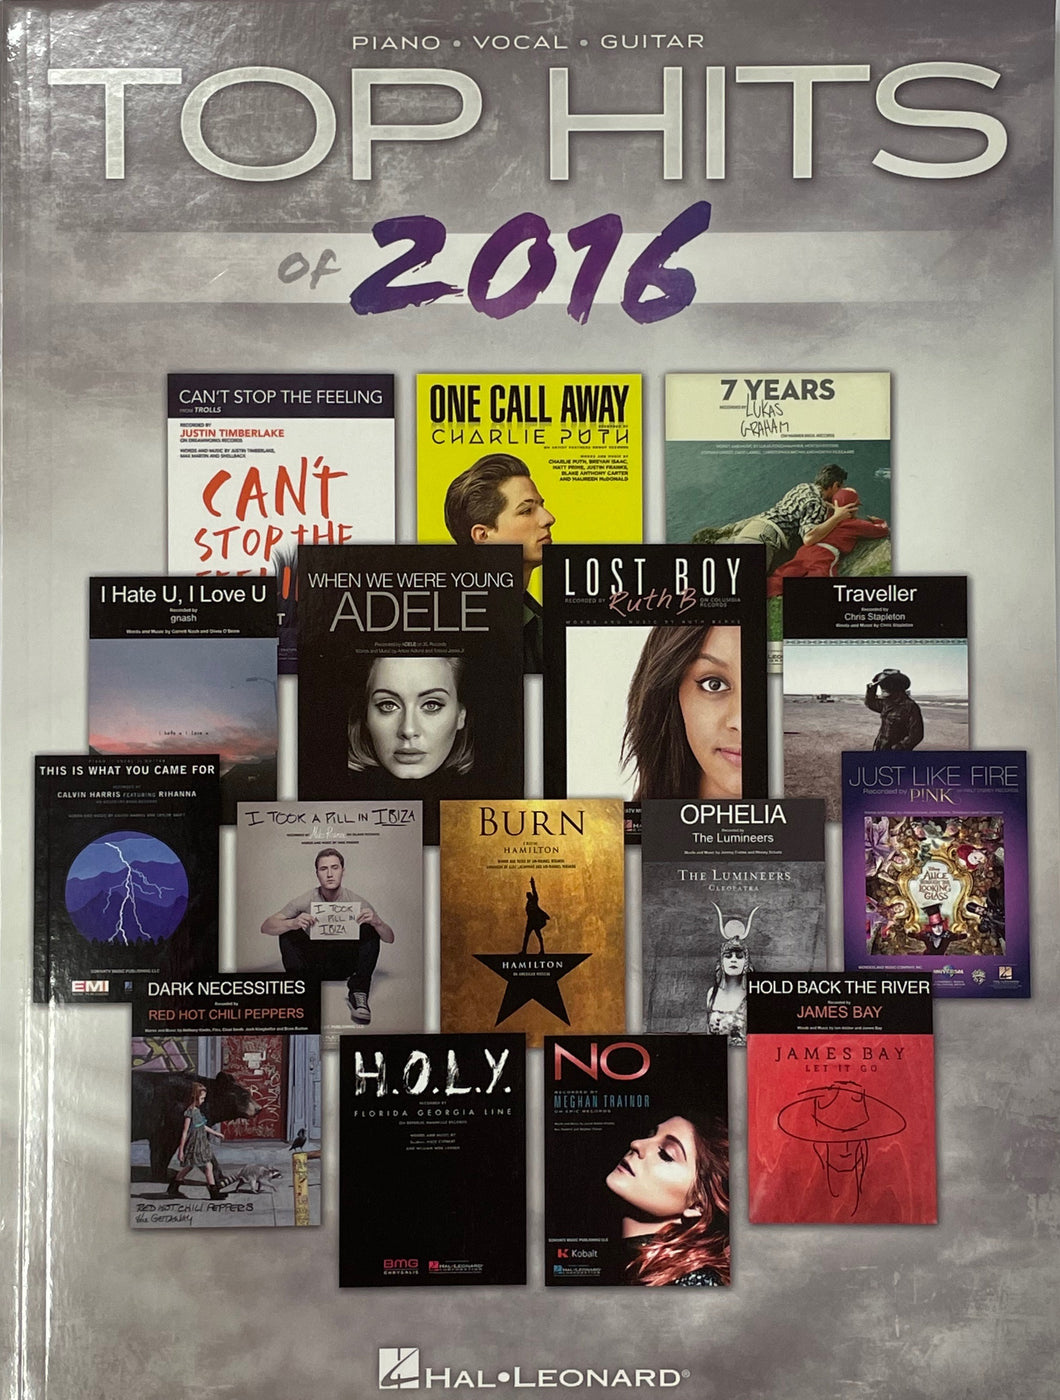 Top Hits of 2016 PVG